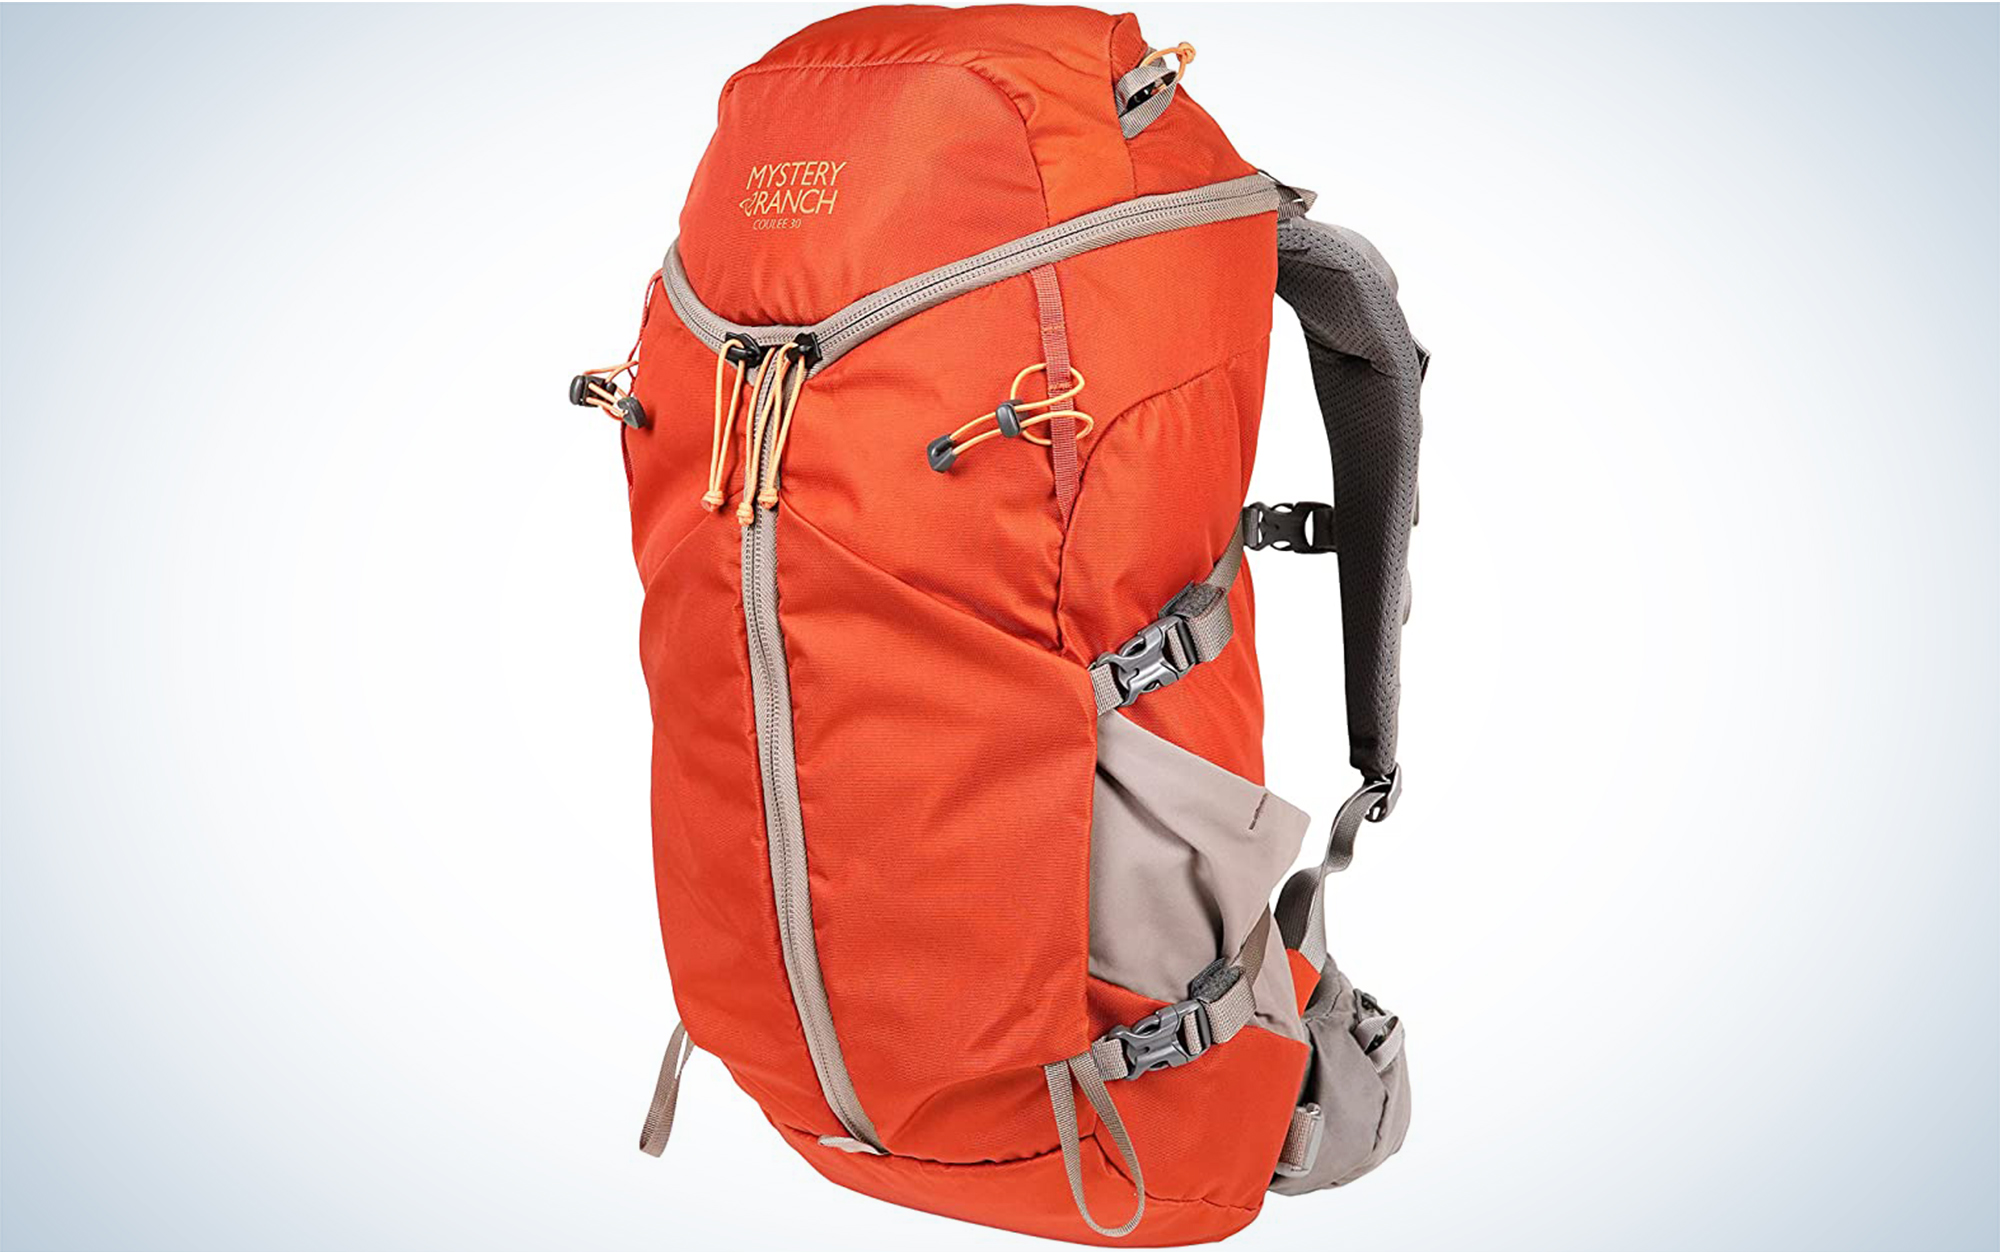 The Mystery Ranch Coulee is one of the best hiking daypacks.